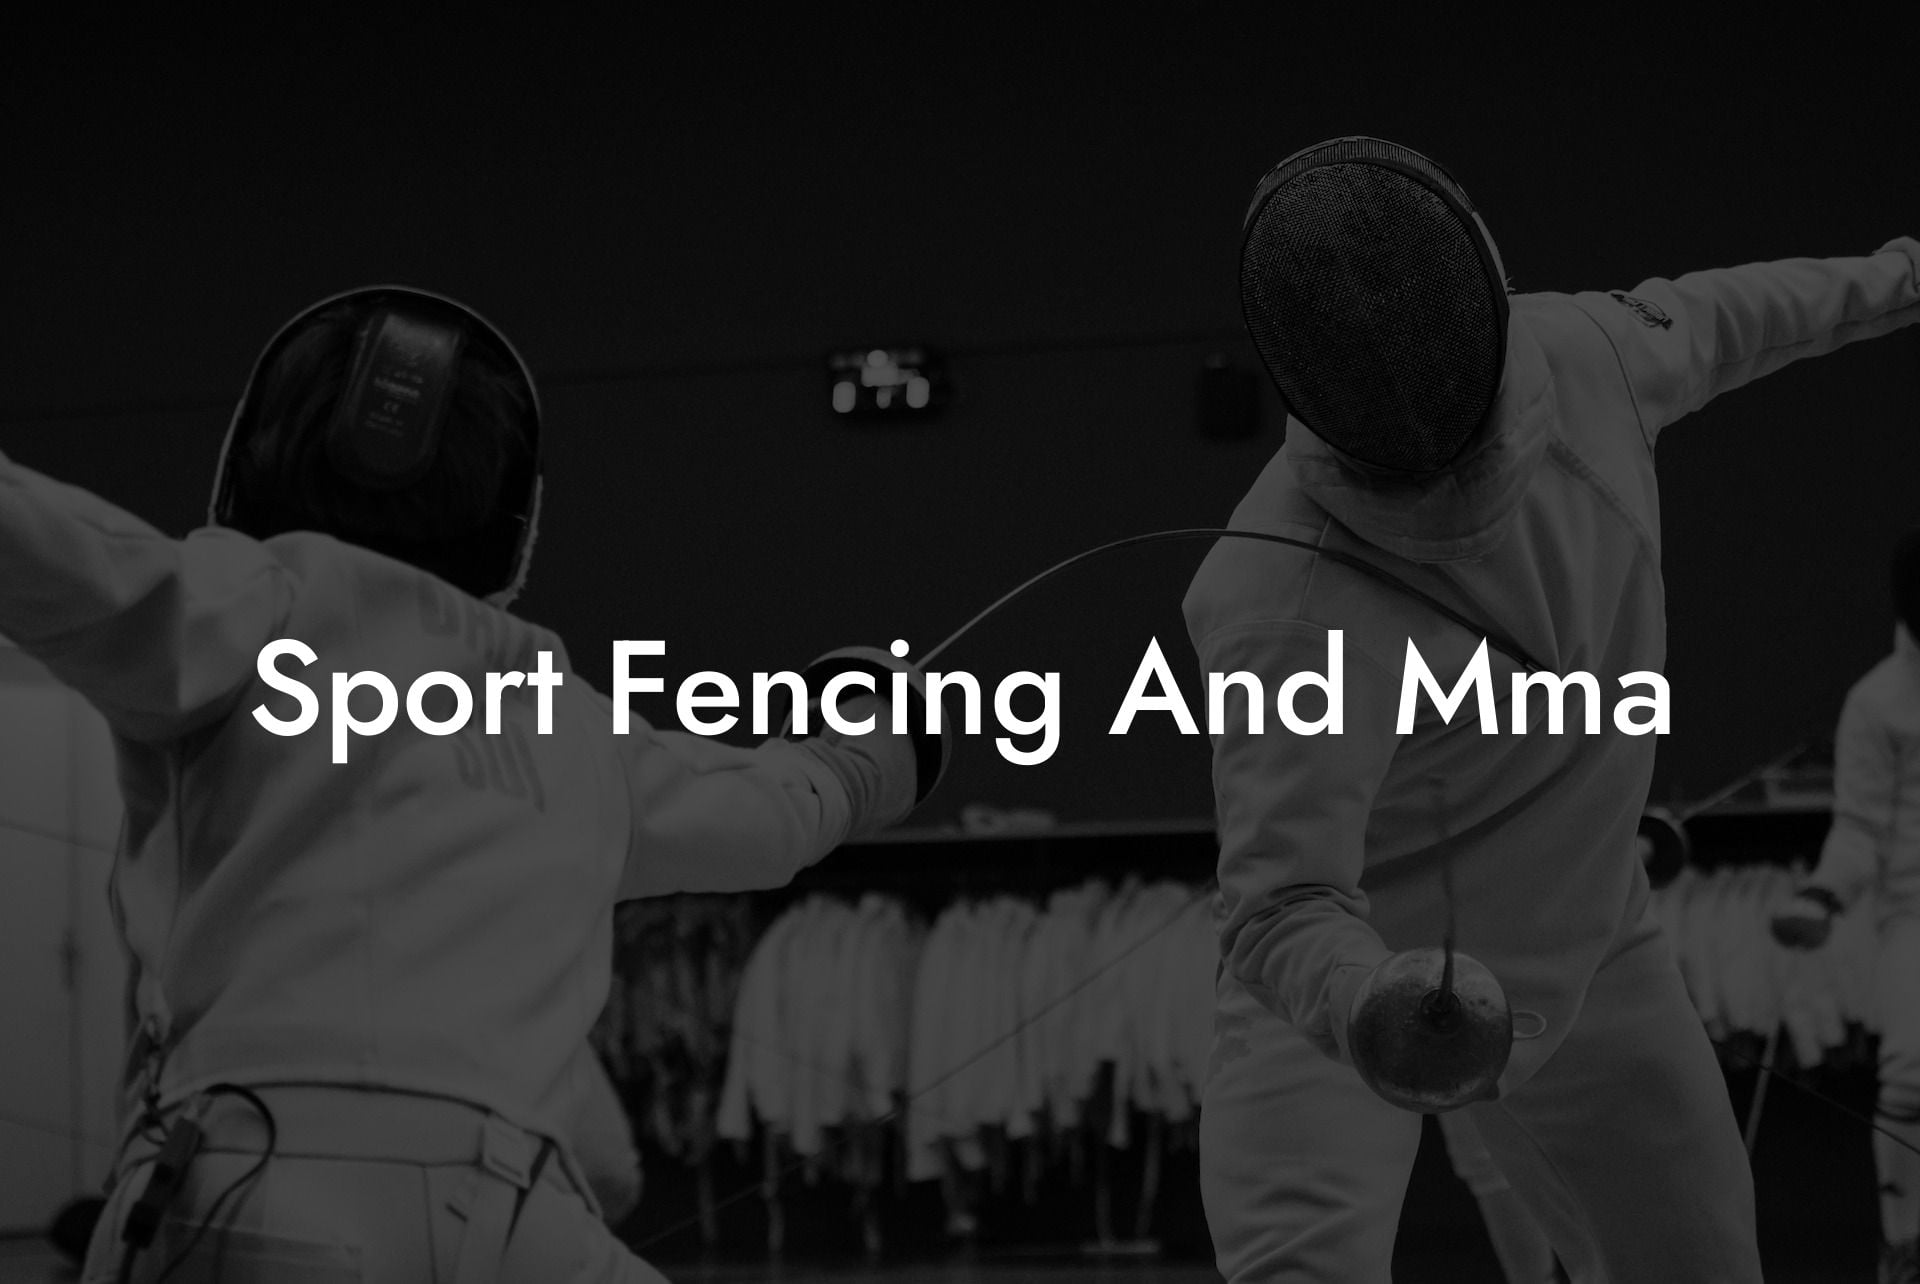 Sport Fencing And Mma